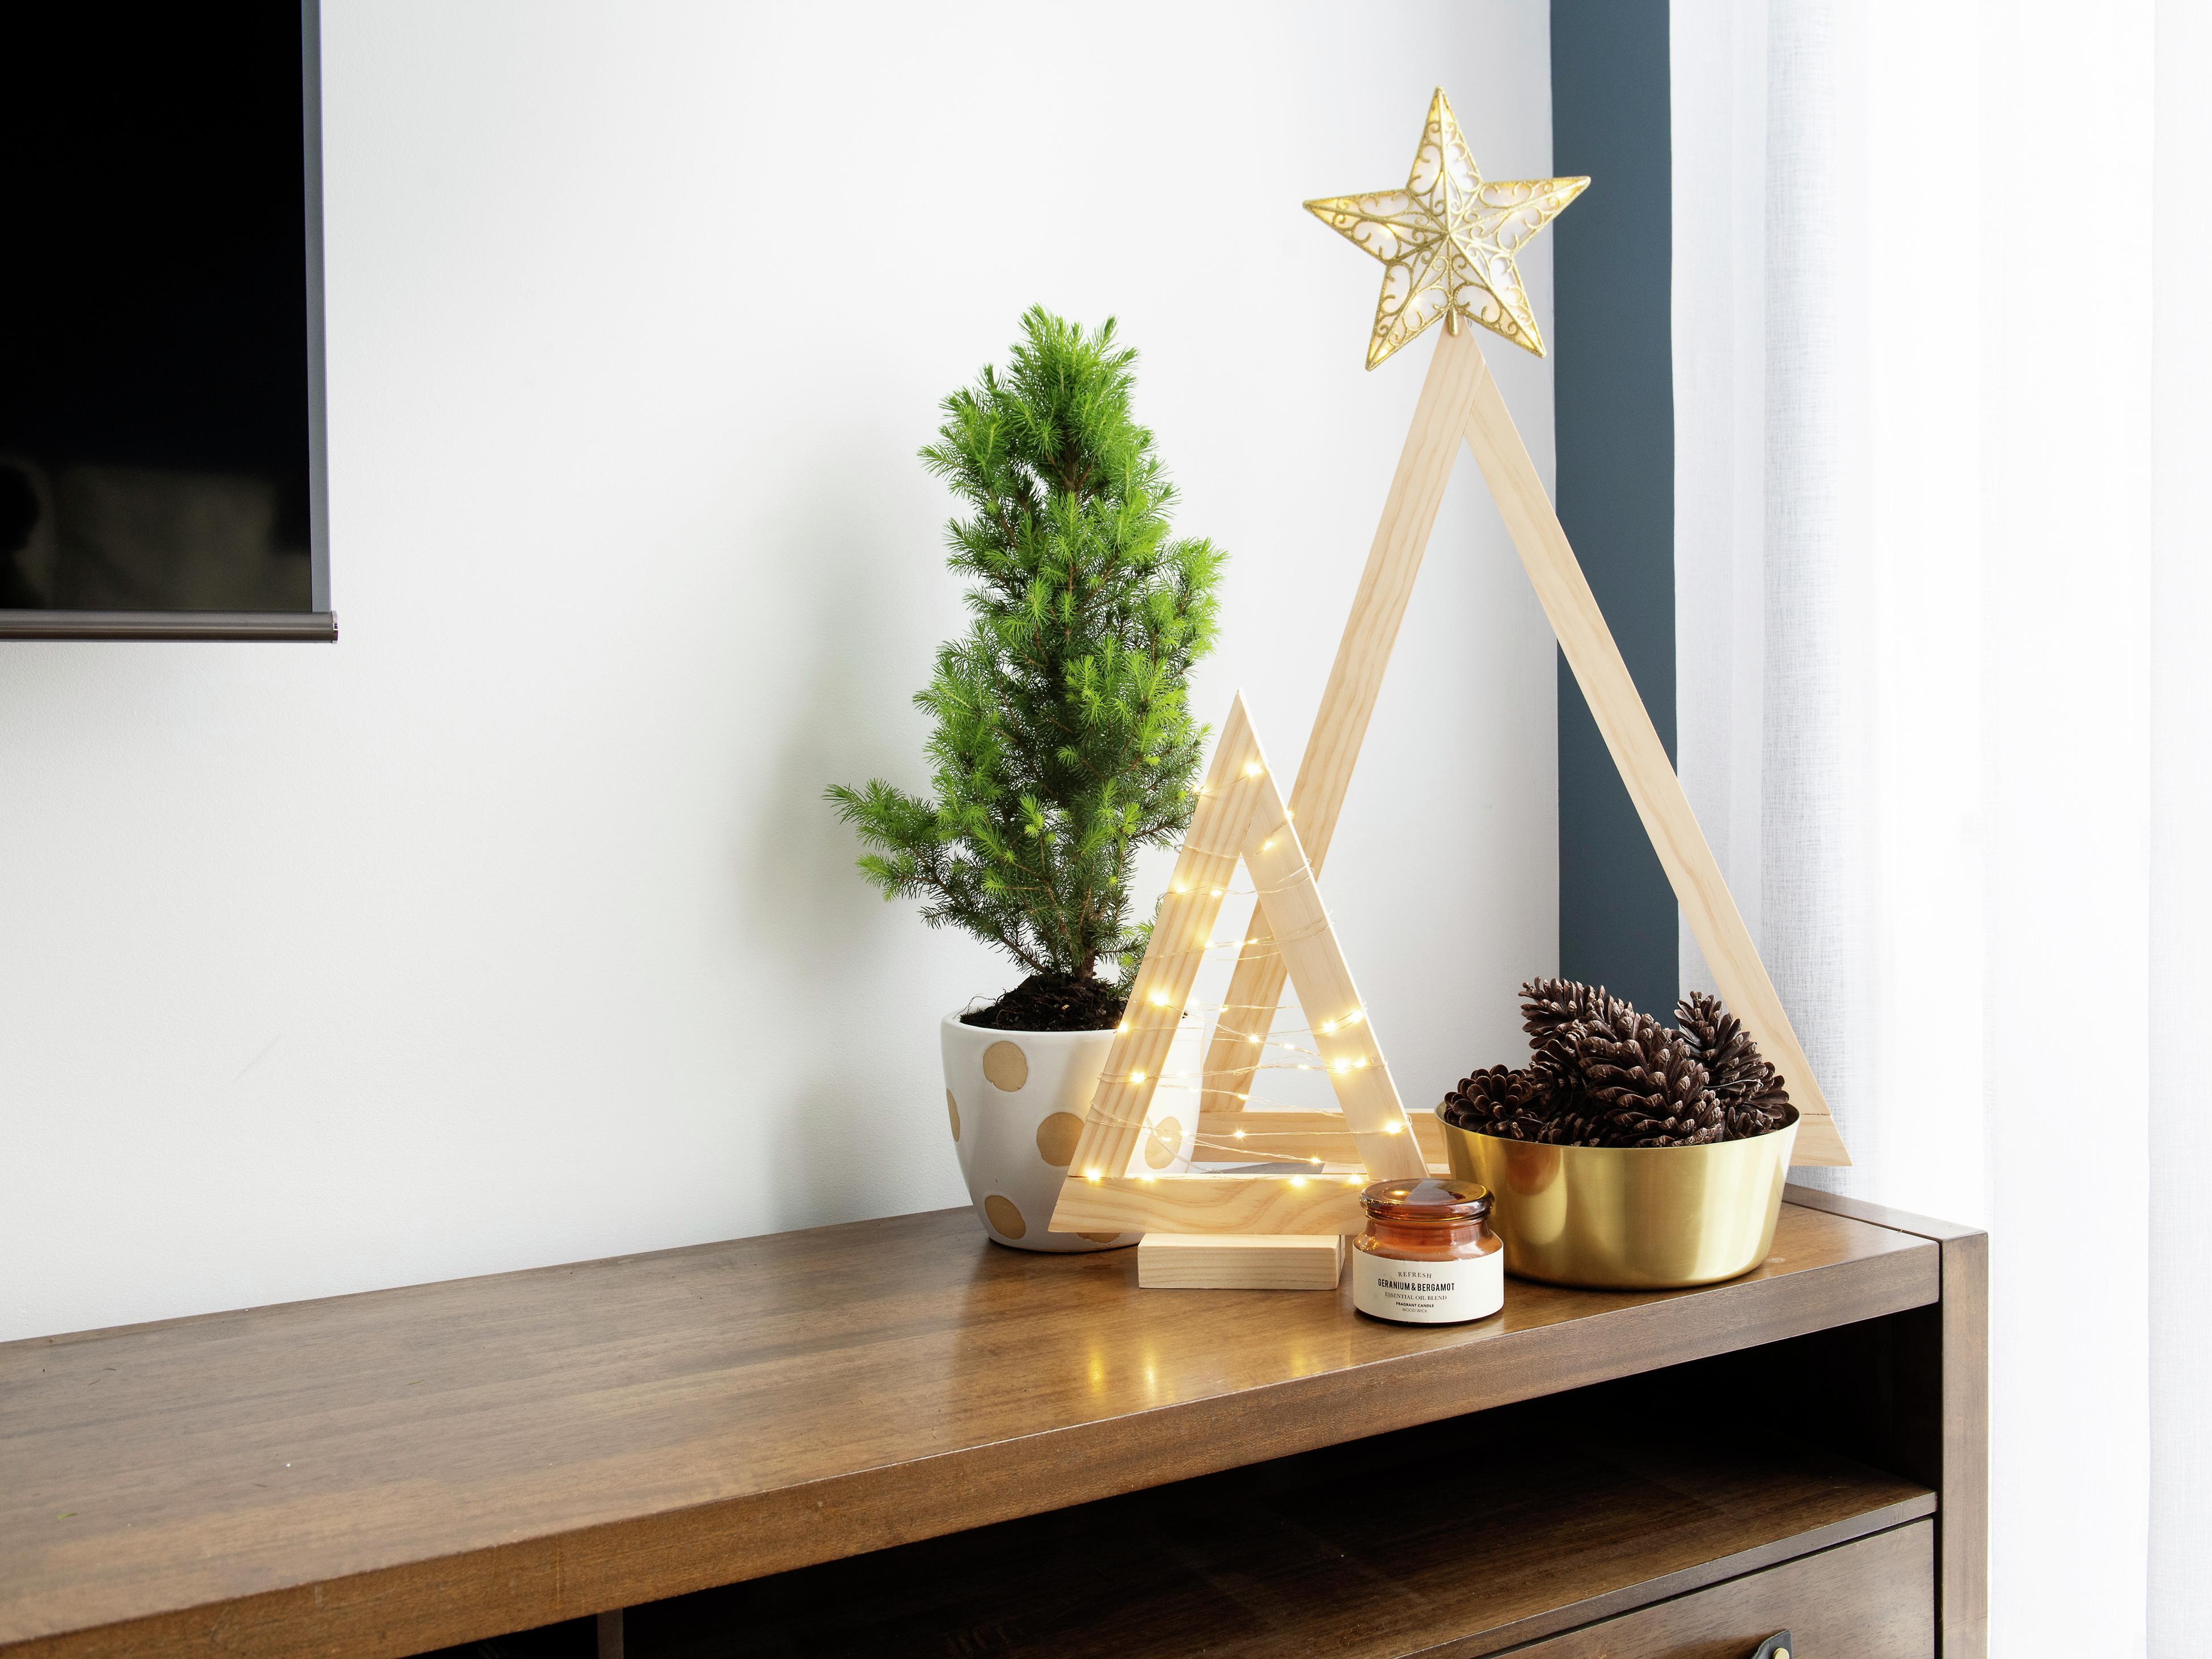 Easy DIY Wooden Christmas Trees - Angela Marie Made